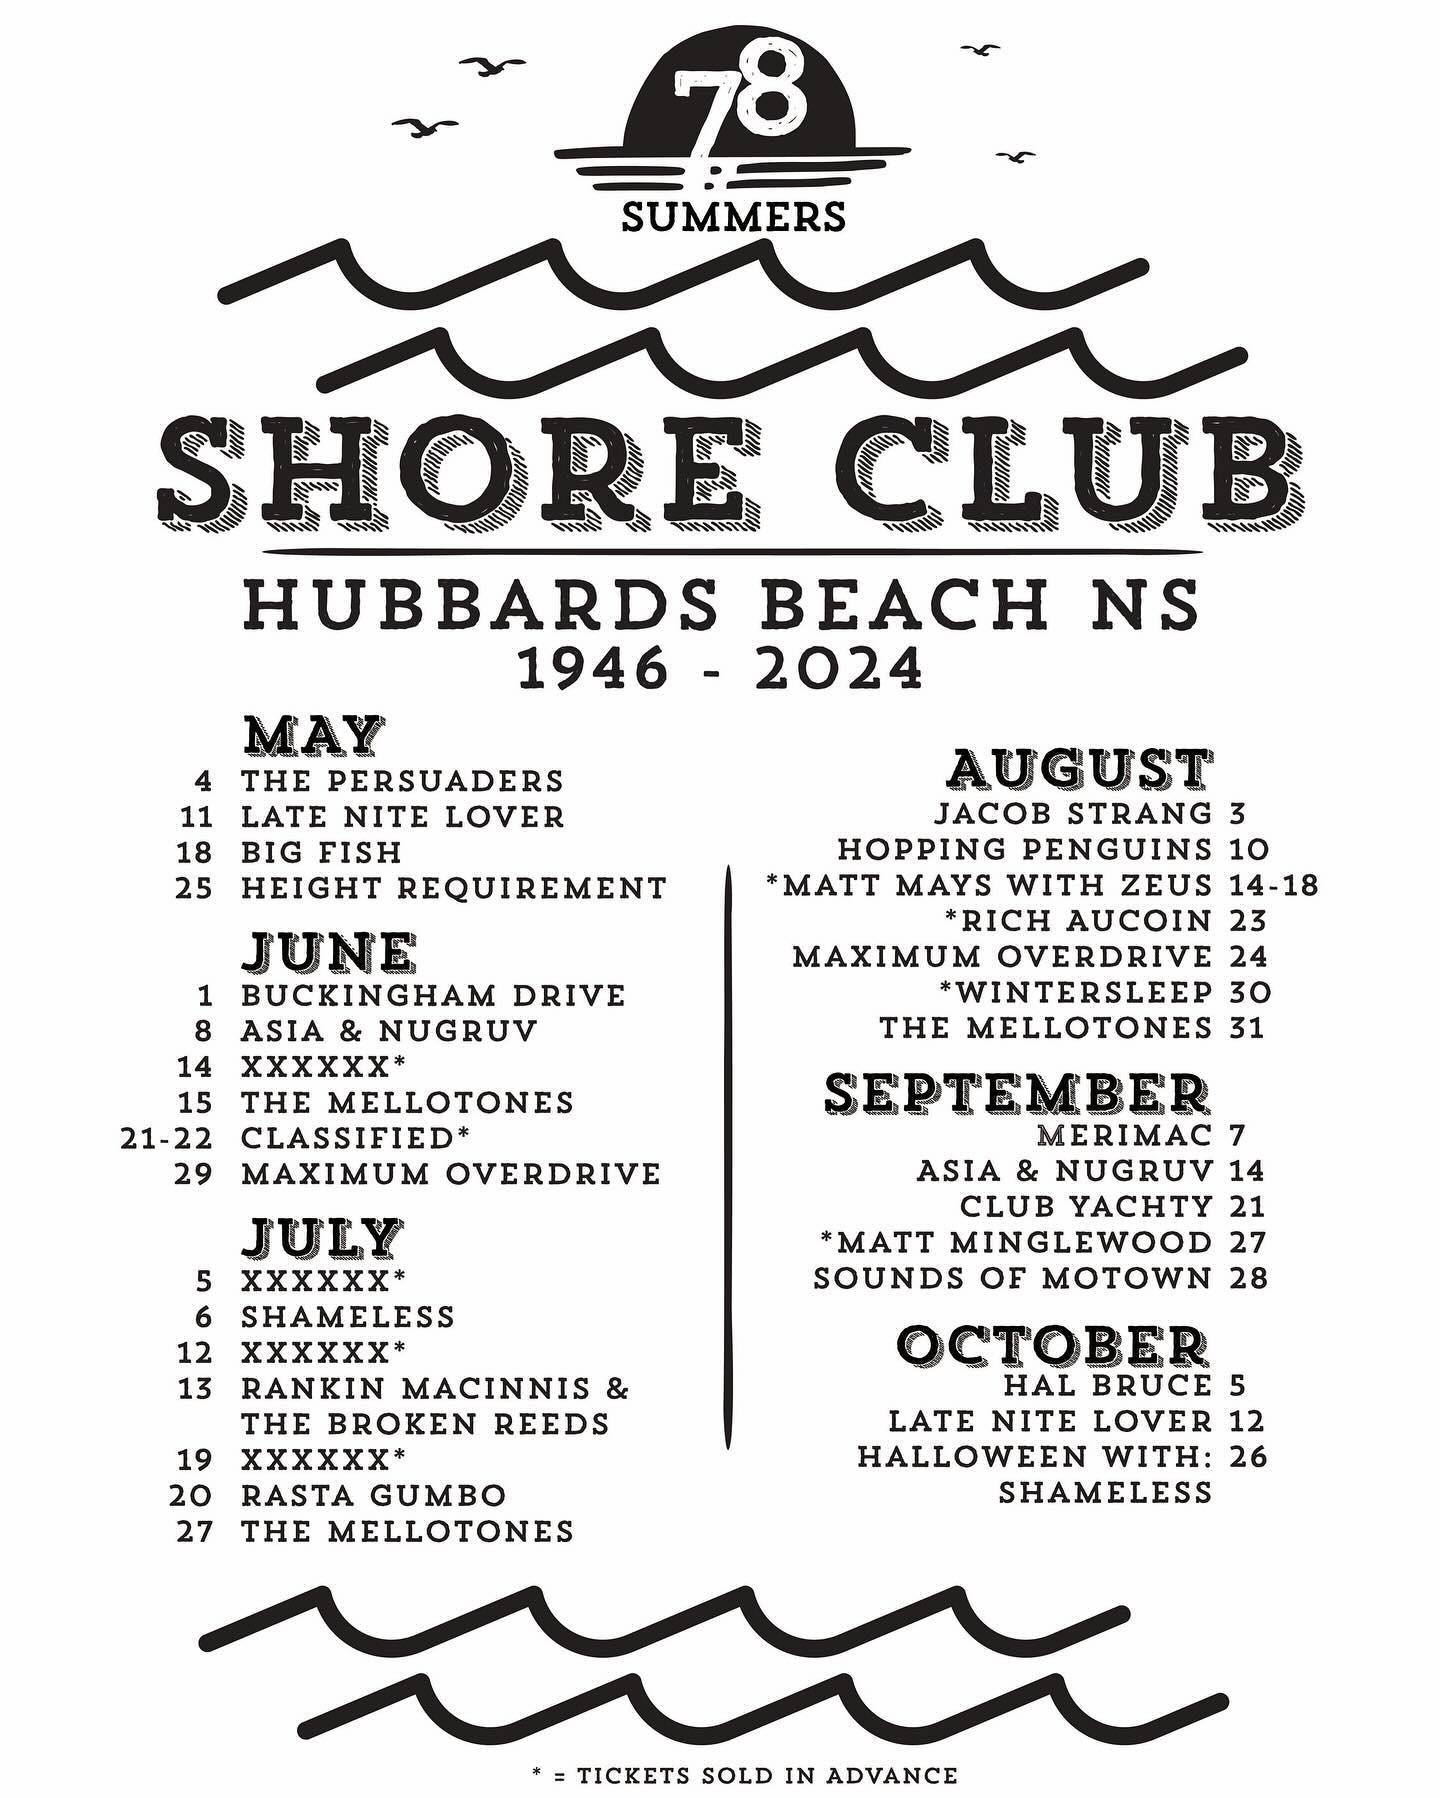 Summer of 2024 is here! Check out our 78th season line up. Share with friends. 
.
Come enjoy a lobster, experience the new deck and check out some of your favorite bands. 
.
XXXXXX* = concerts that are not yet announced
.
See you at the beach!
.
#sho